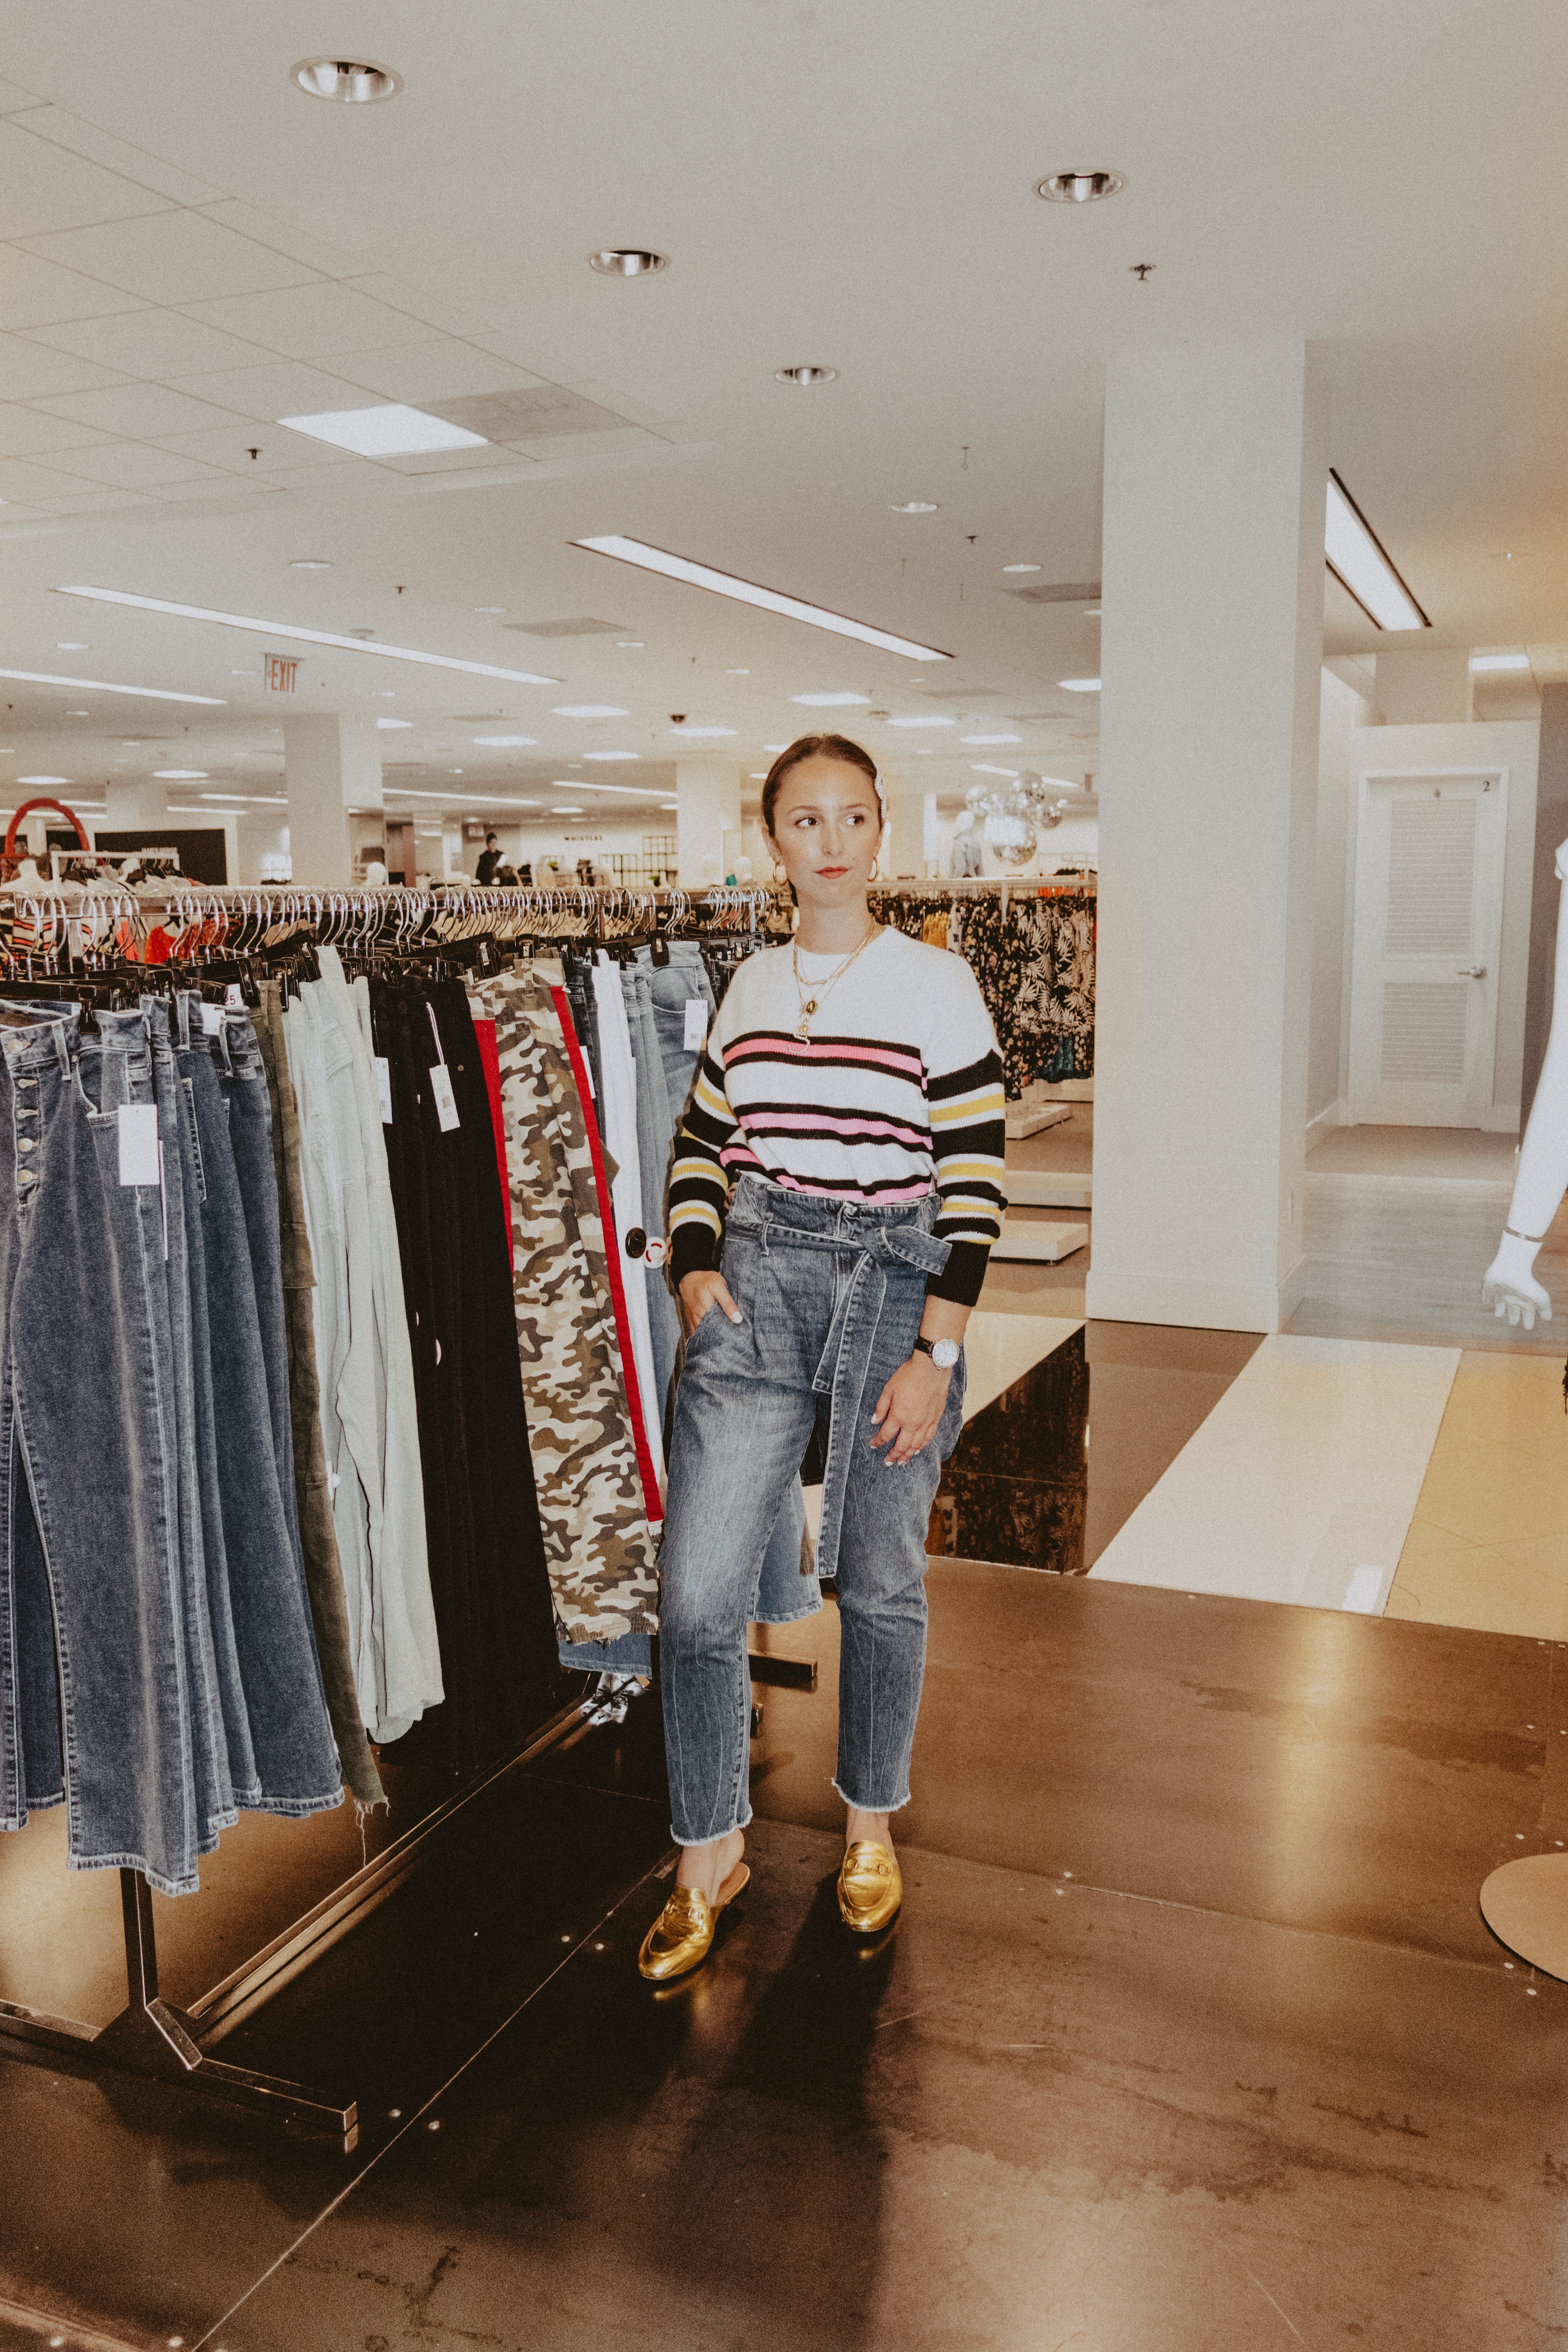 Bloomingdale's White Plains Denim Days Sale - Why To Shop In-Store #bloomigndales #fall #fallfashion #fallstyle #falloutfit #denin #jeans #designersale #designerdenim #dl1961 #fashion #outfit #style #shopping #sale